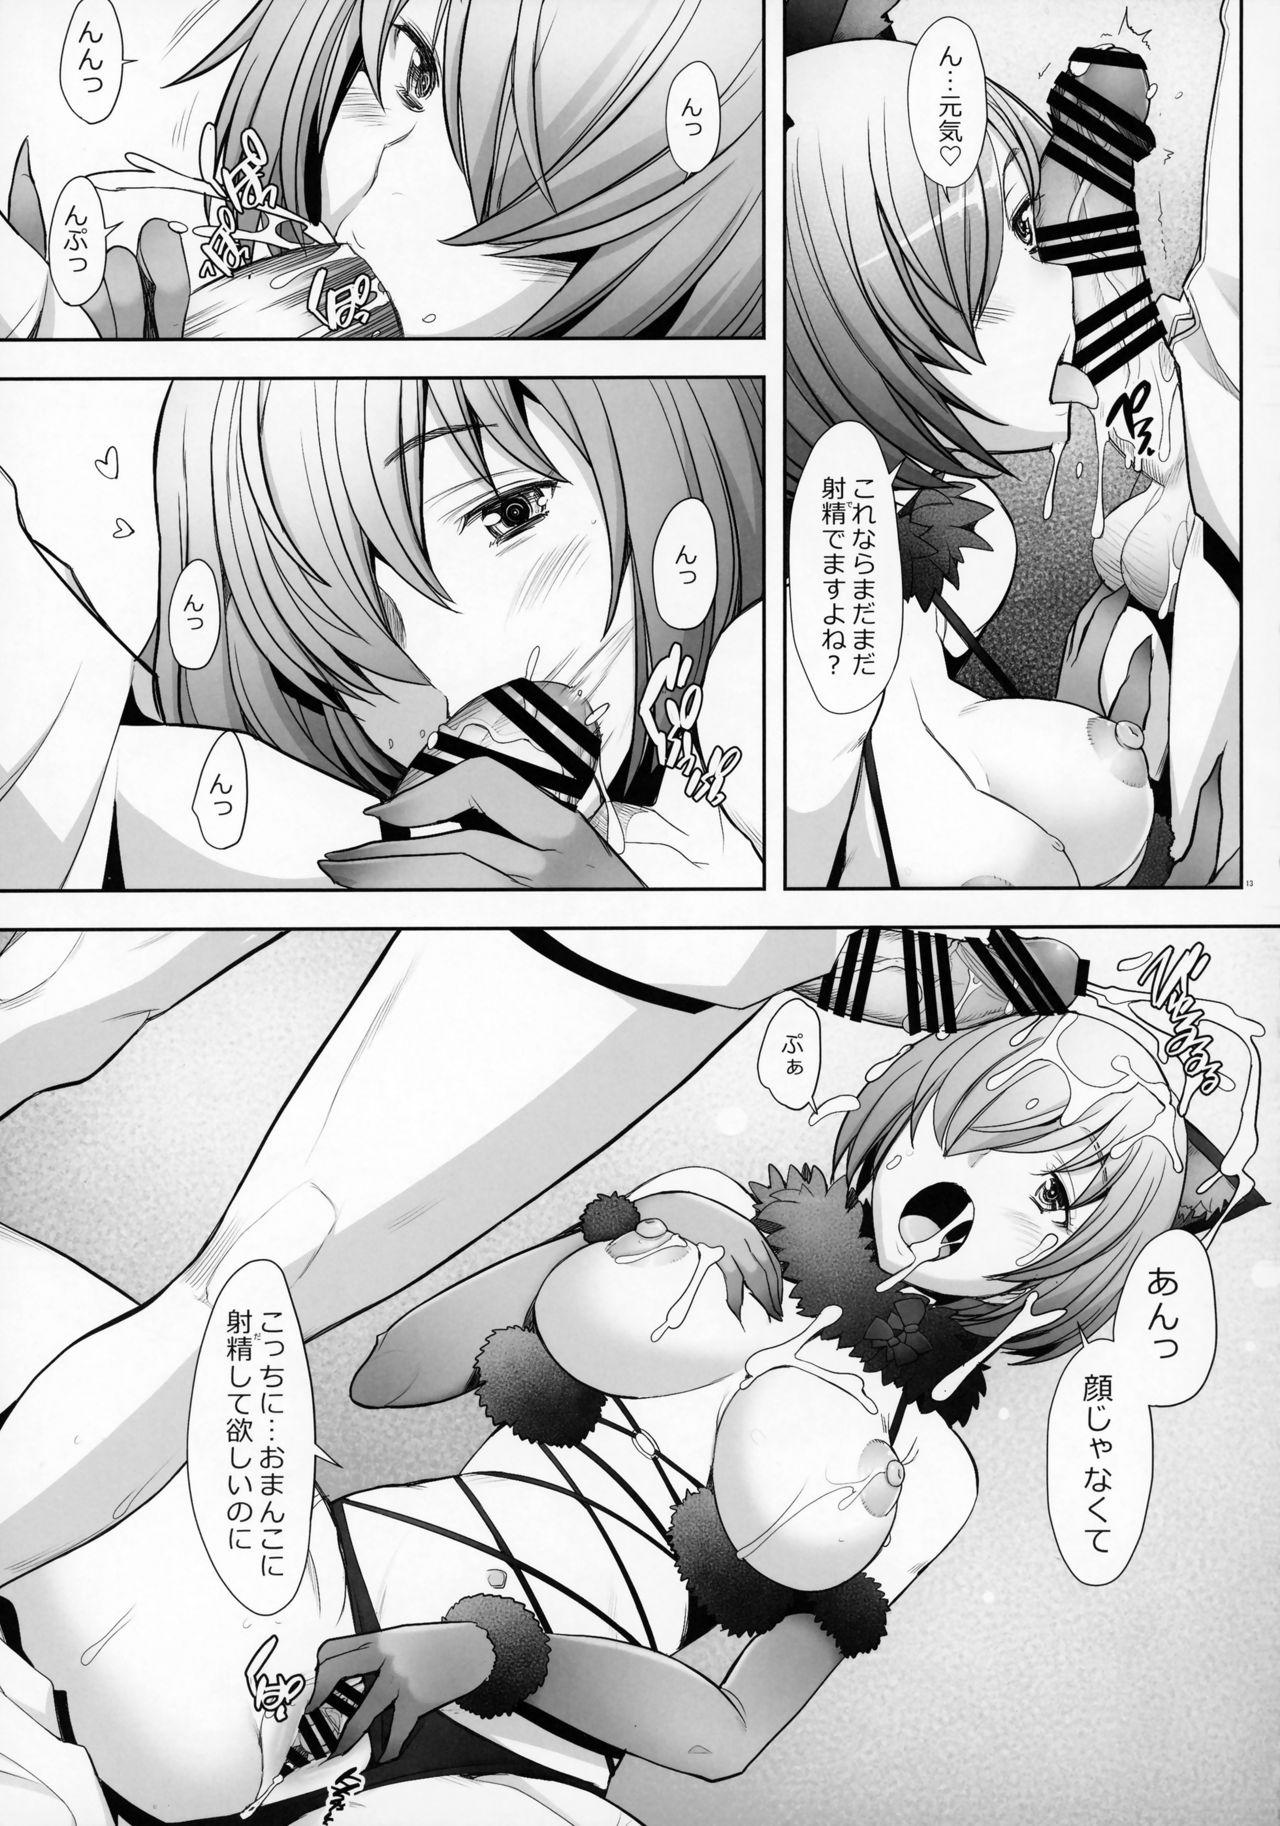 Load Oideyo Pink Chaldea - Fate grand order Deflowered - Page 12